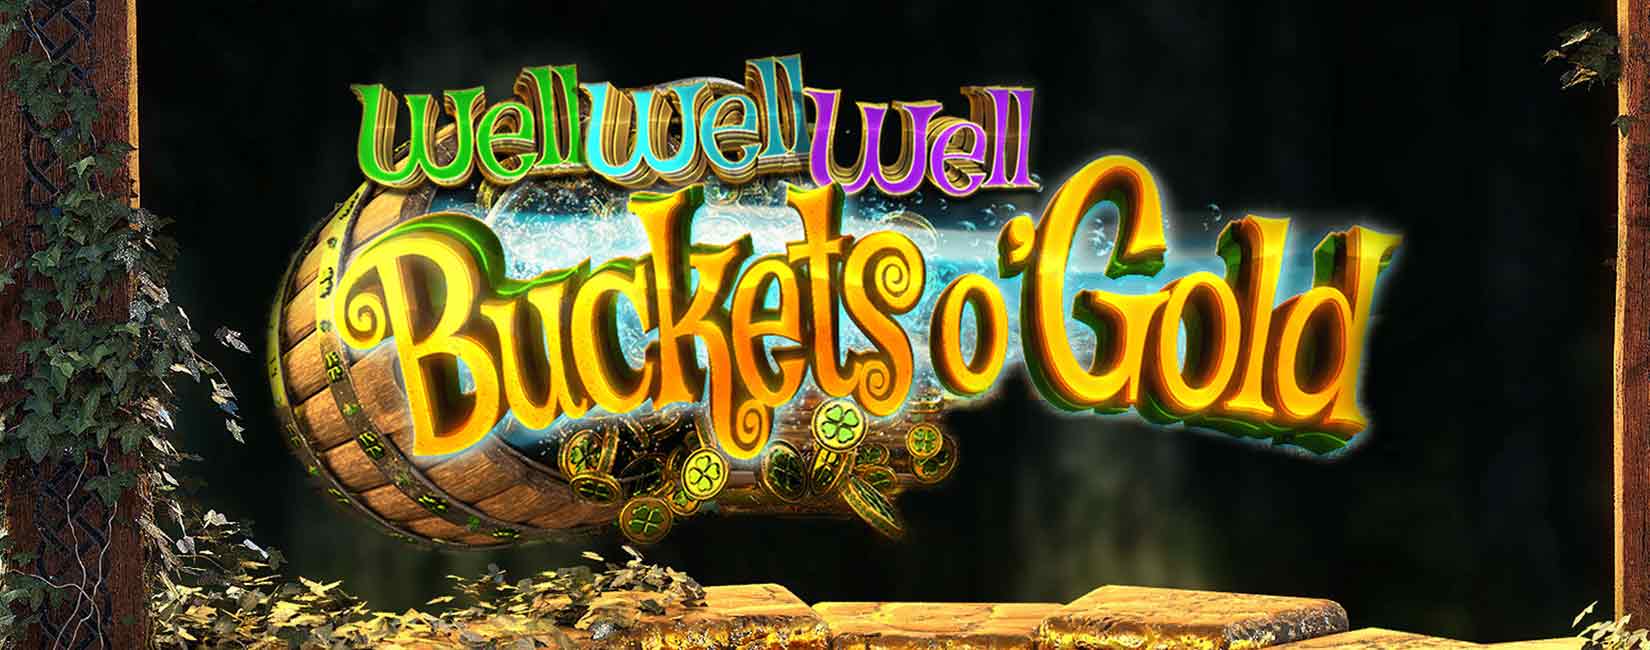 CRE278941November Game ReviewsWell well well bucket O GoldGBstaticpp1650x650